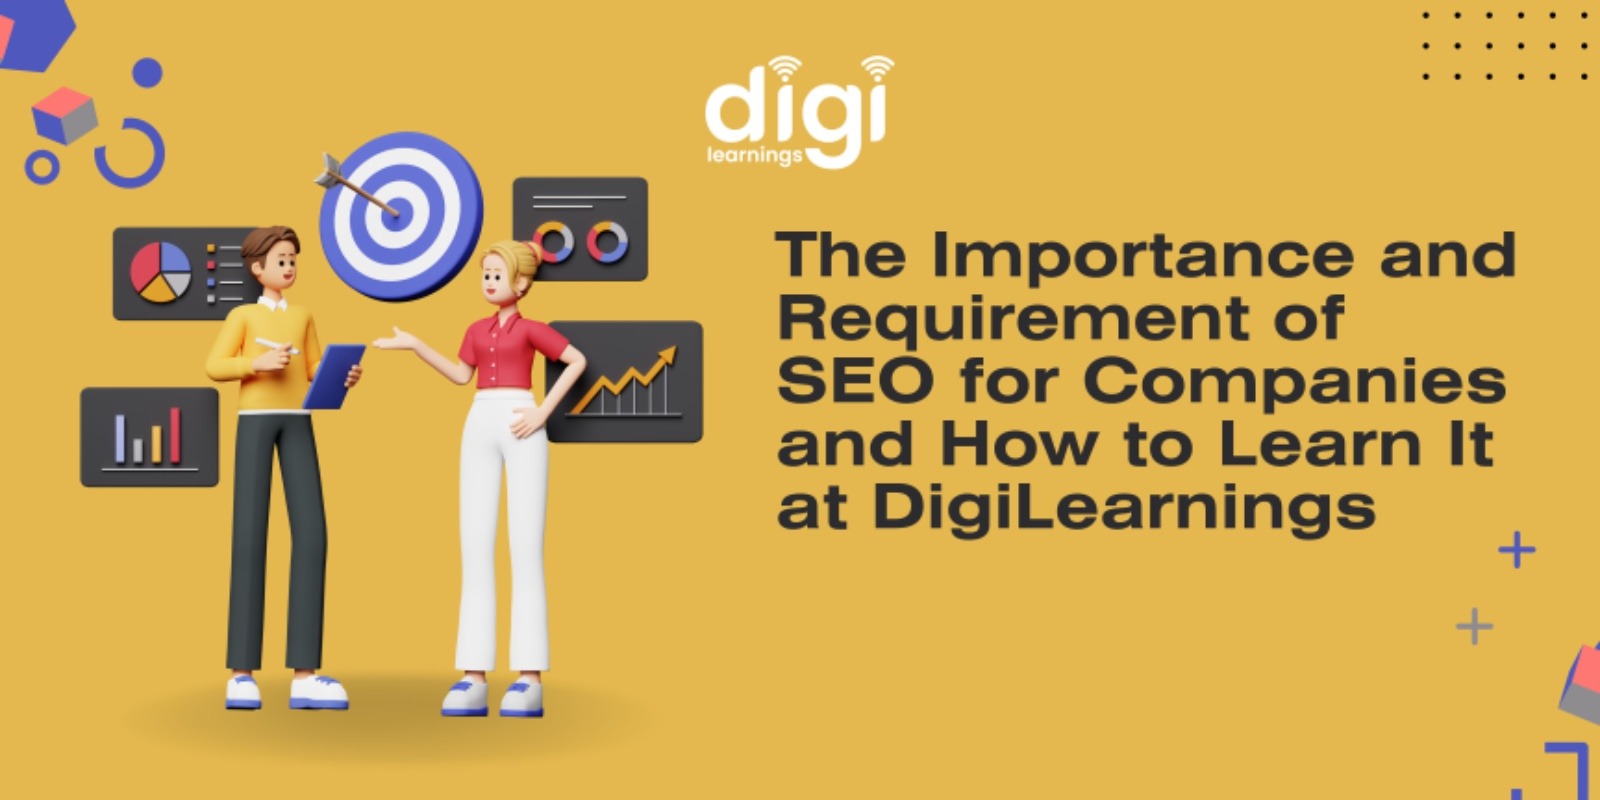 The Importance and Requirement of SMO for Companies and How to Learn It at DigiLearnings